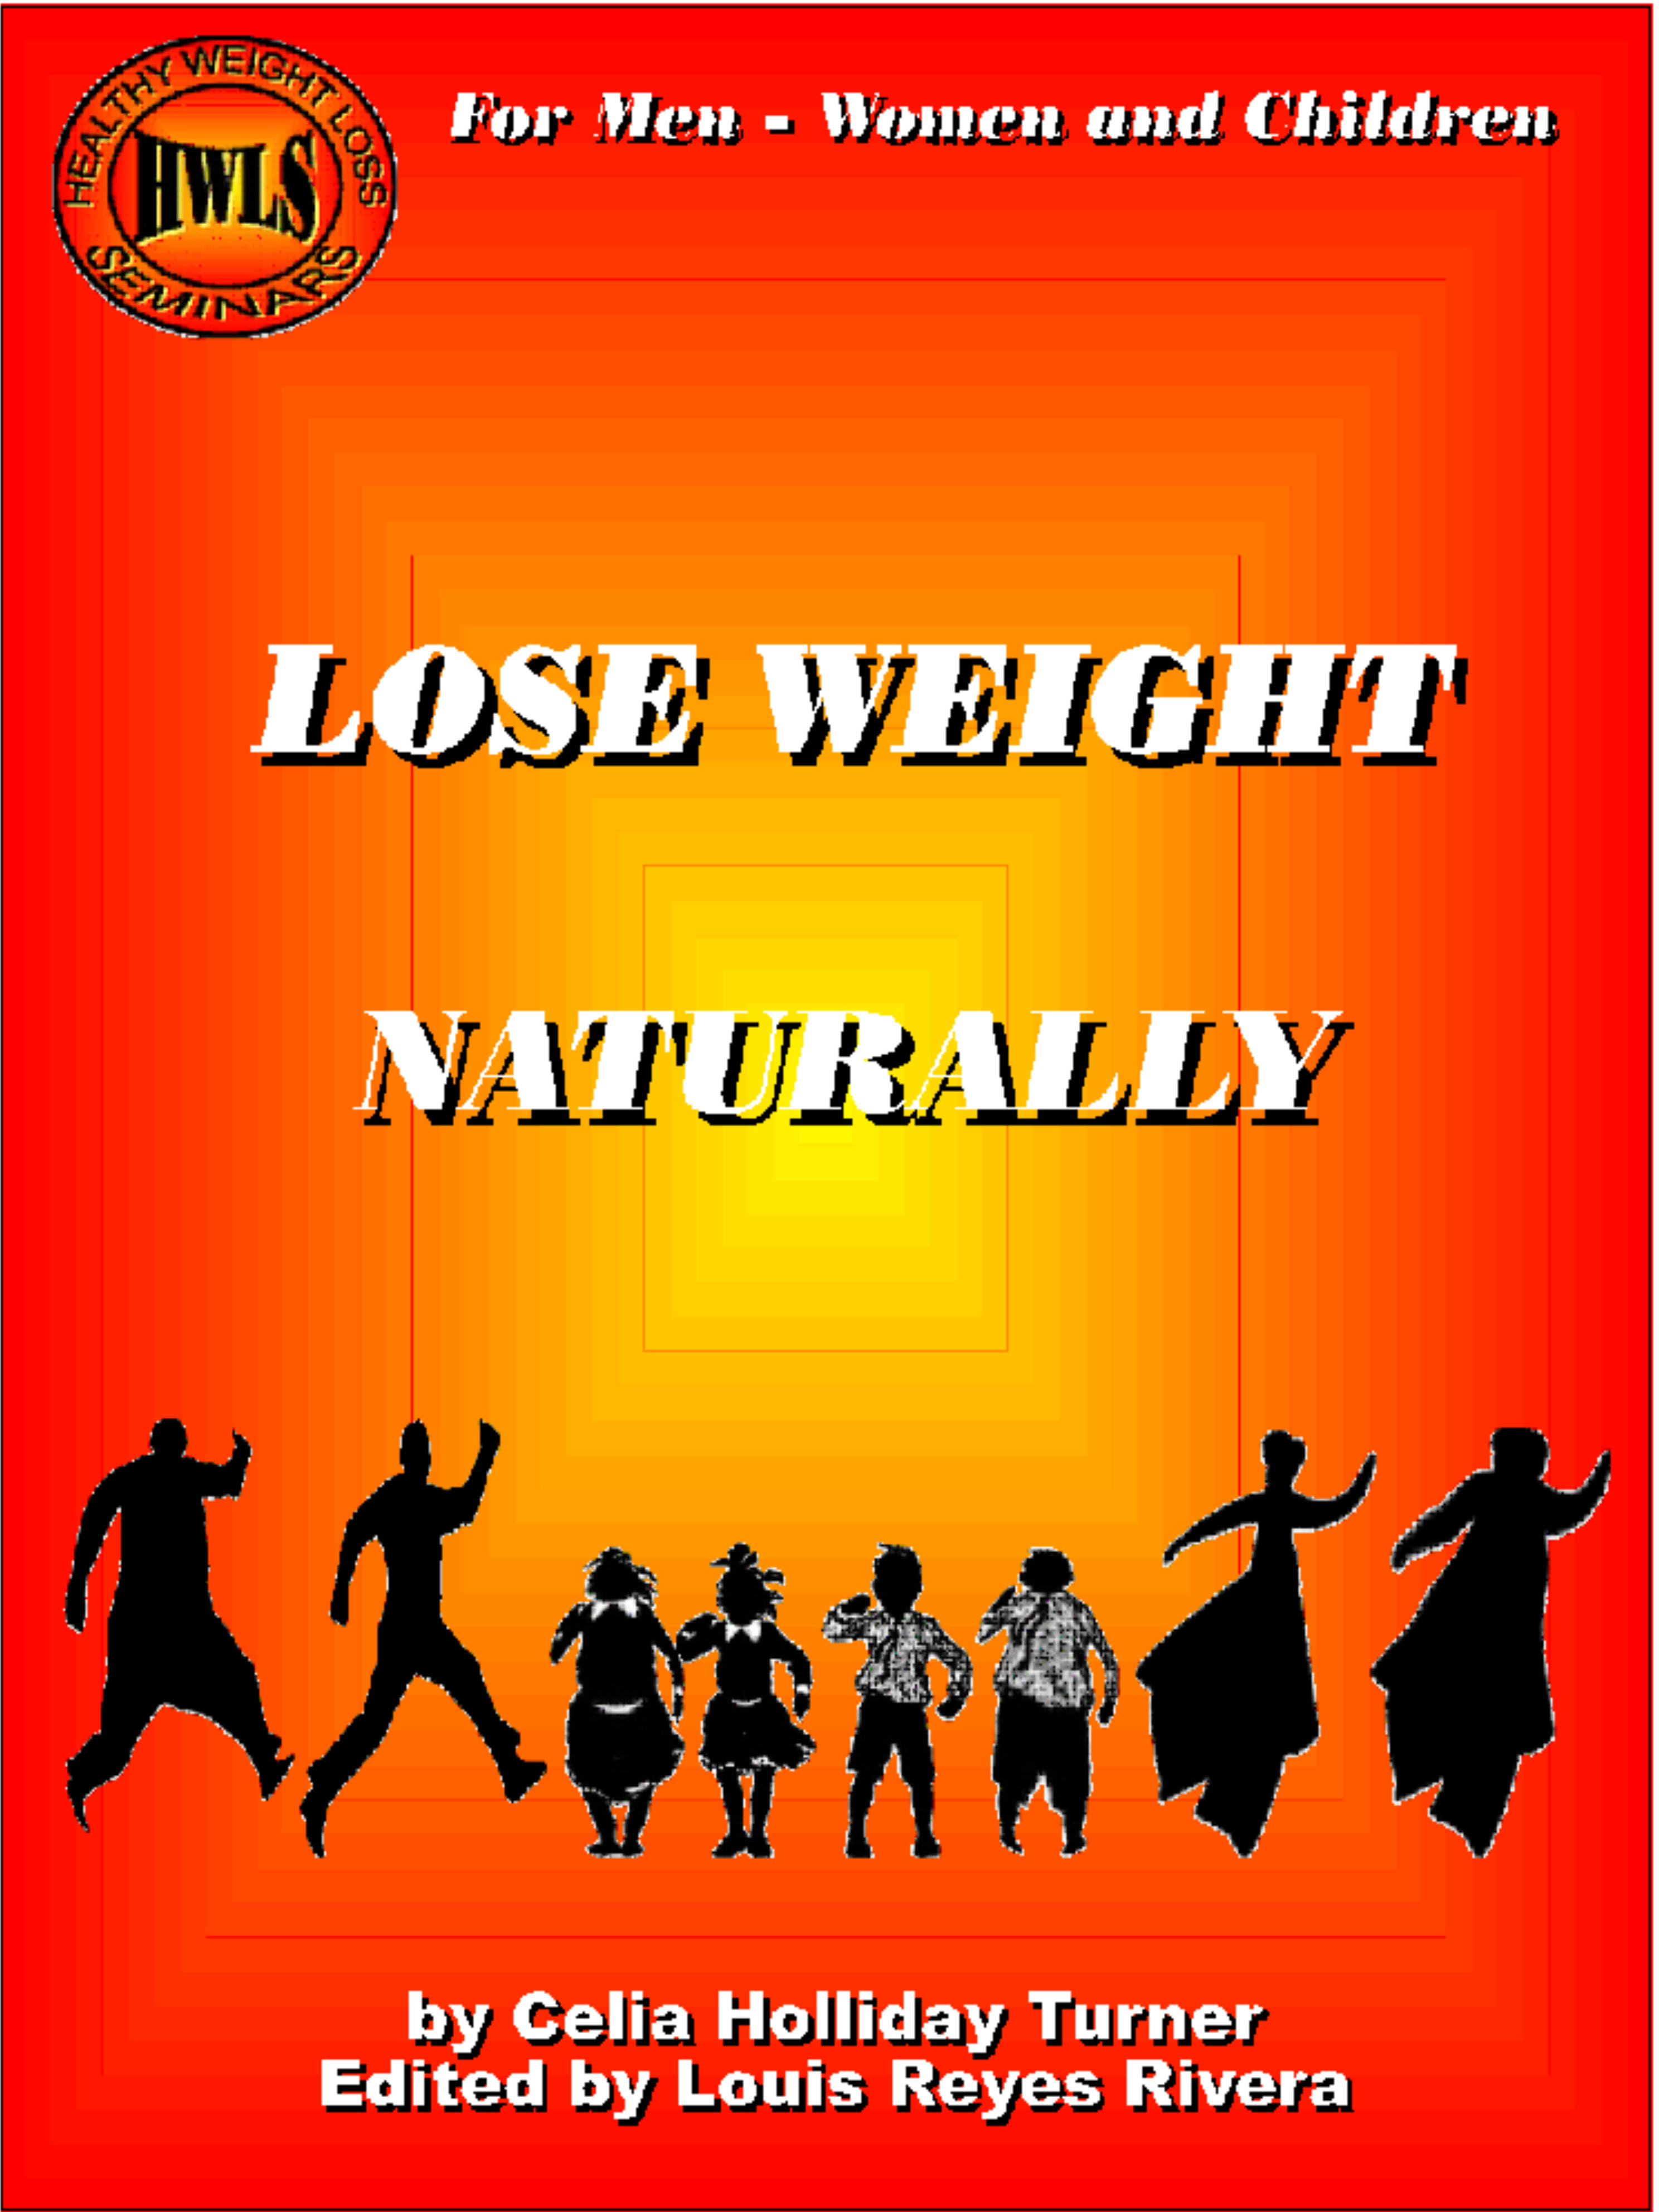 Lose Weight Naturally by Celia Holliday Turner